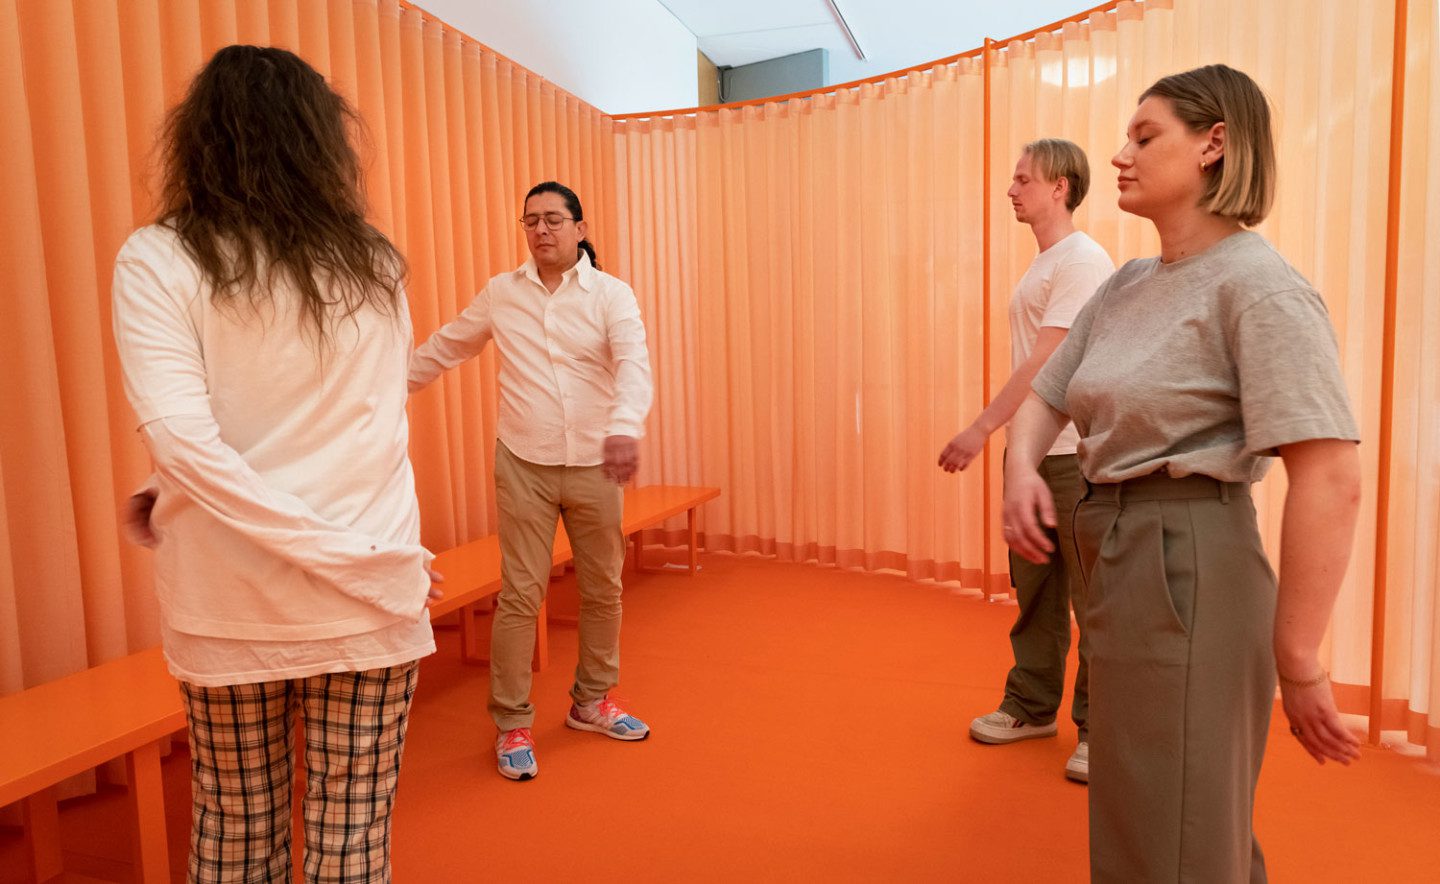  Four people swinging their arms in one of Jeppe Hein's chakra rooms